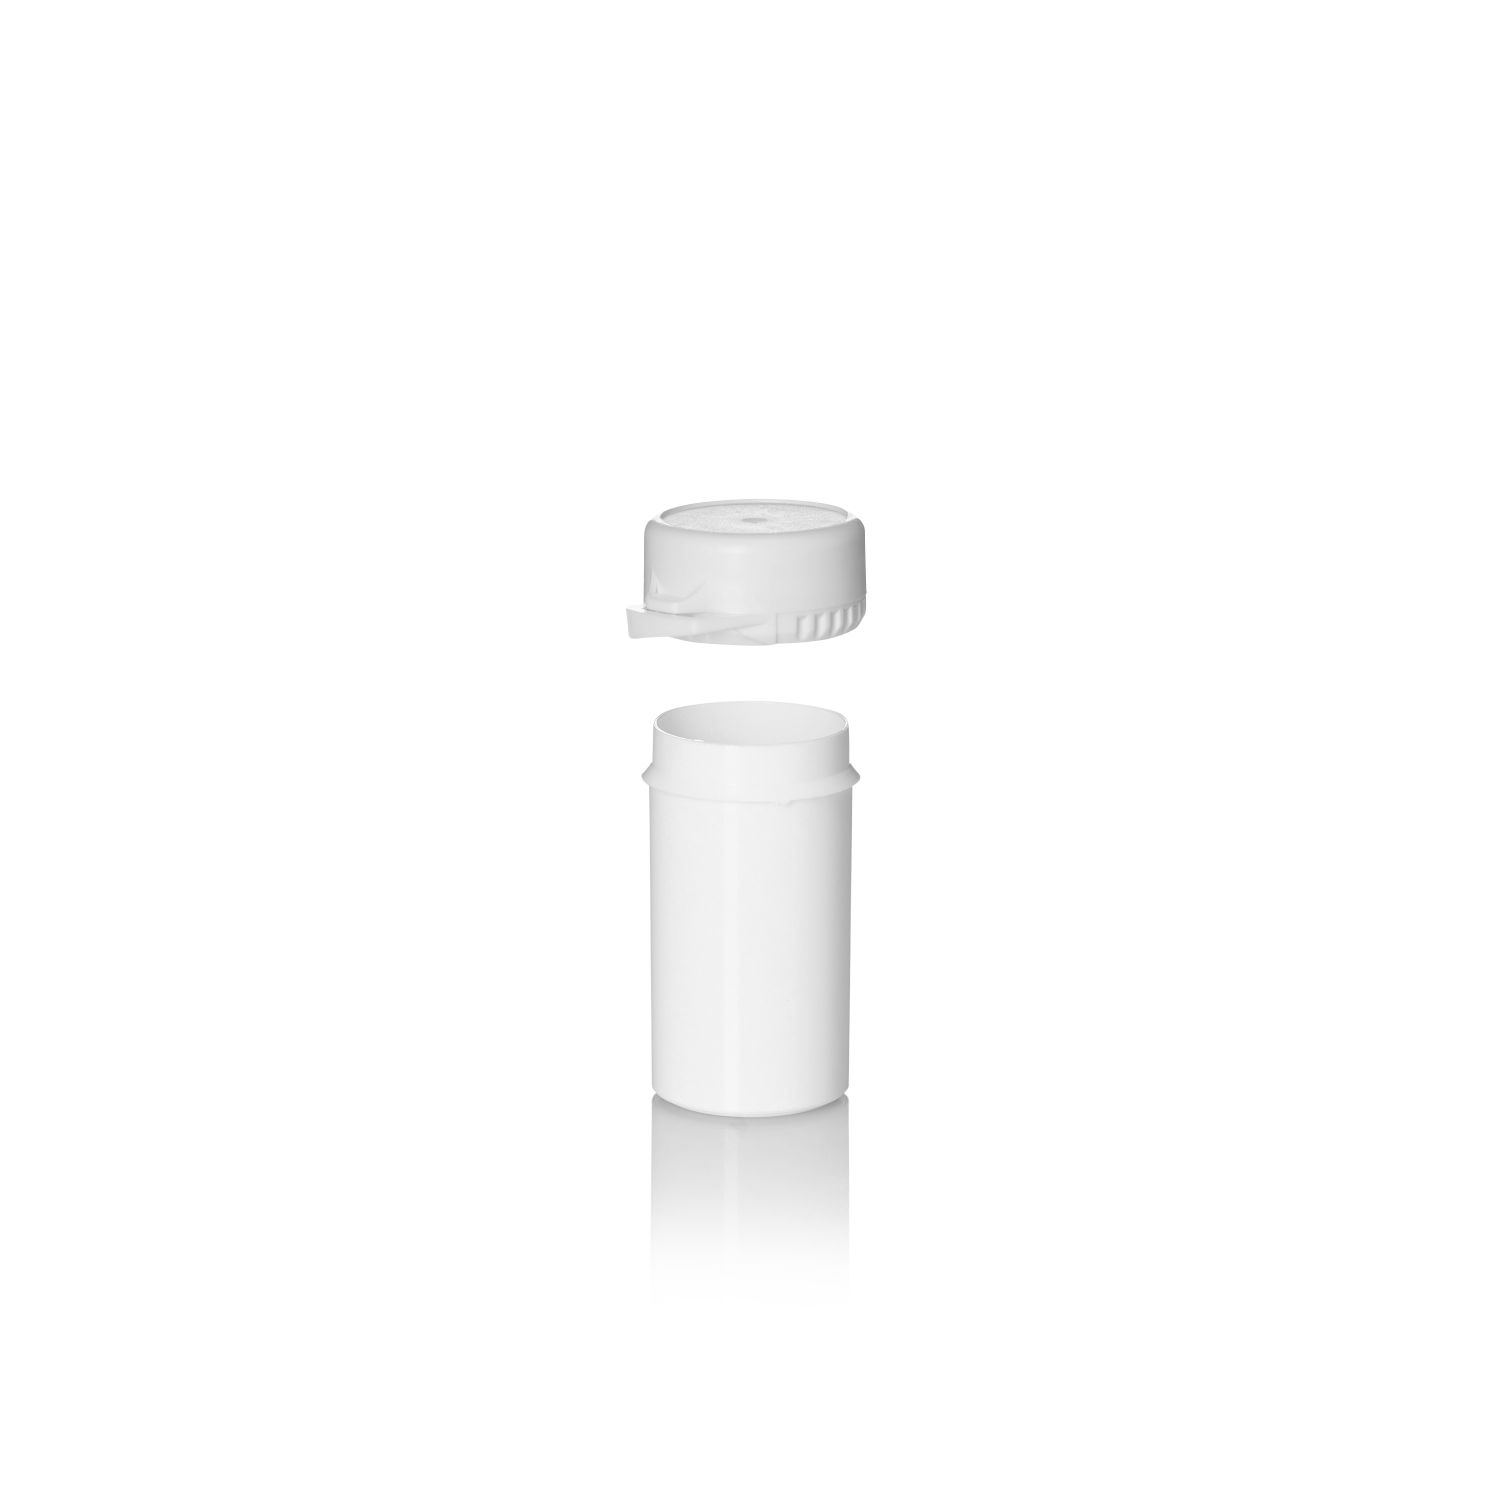 Stockists Of 26ml White PP Tamper Evident Snapsecure Jar